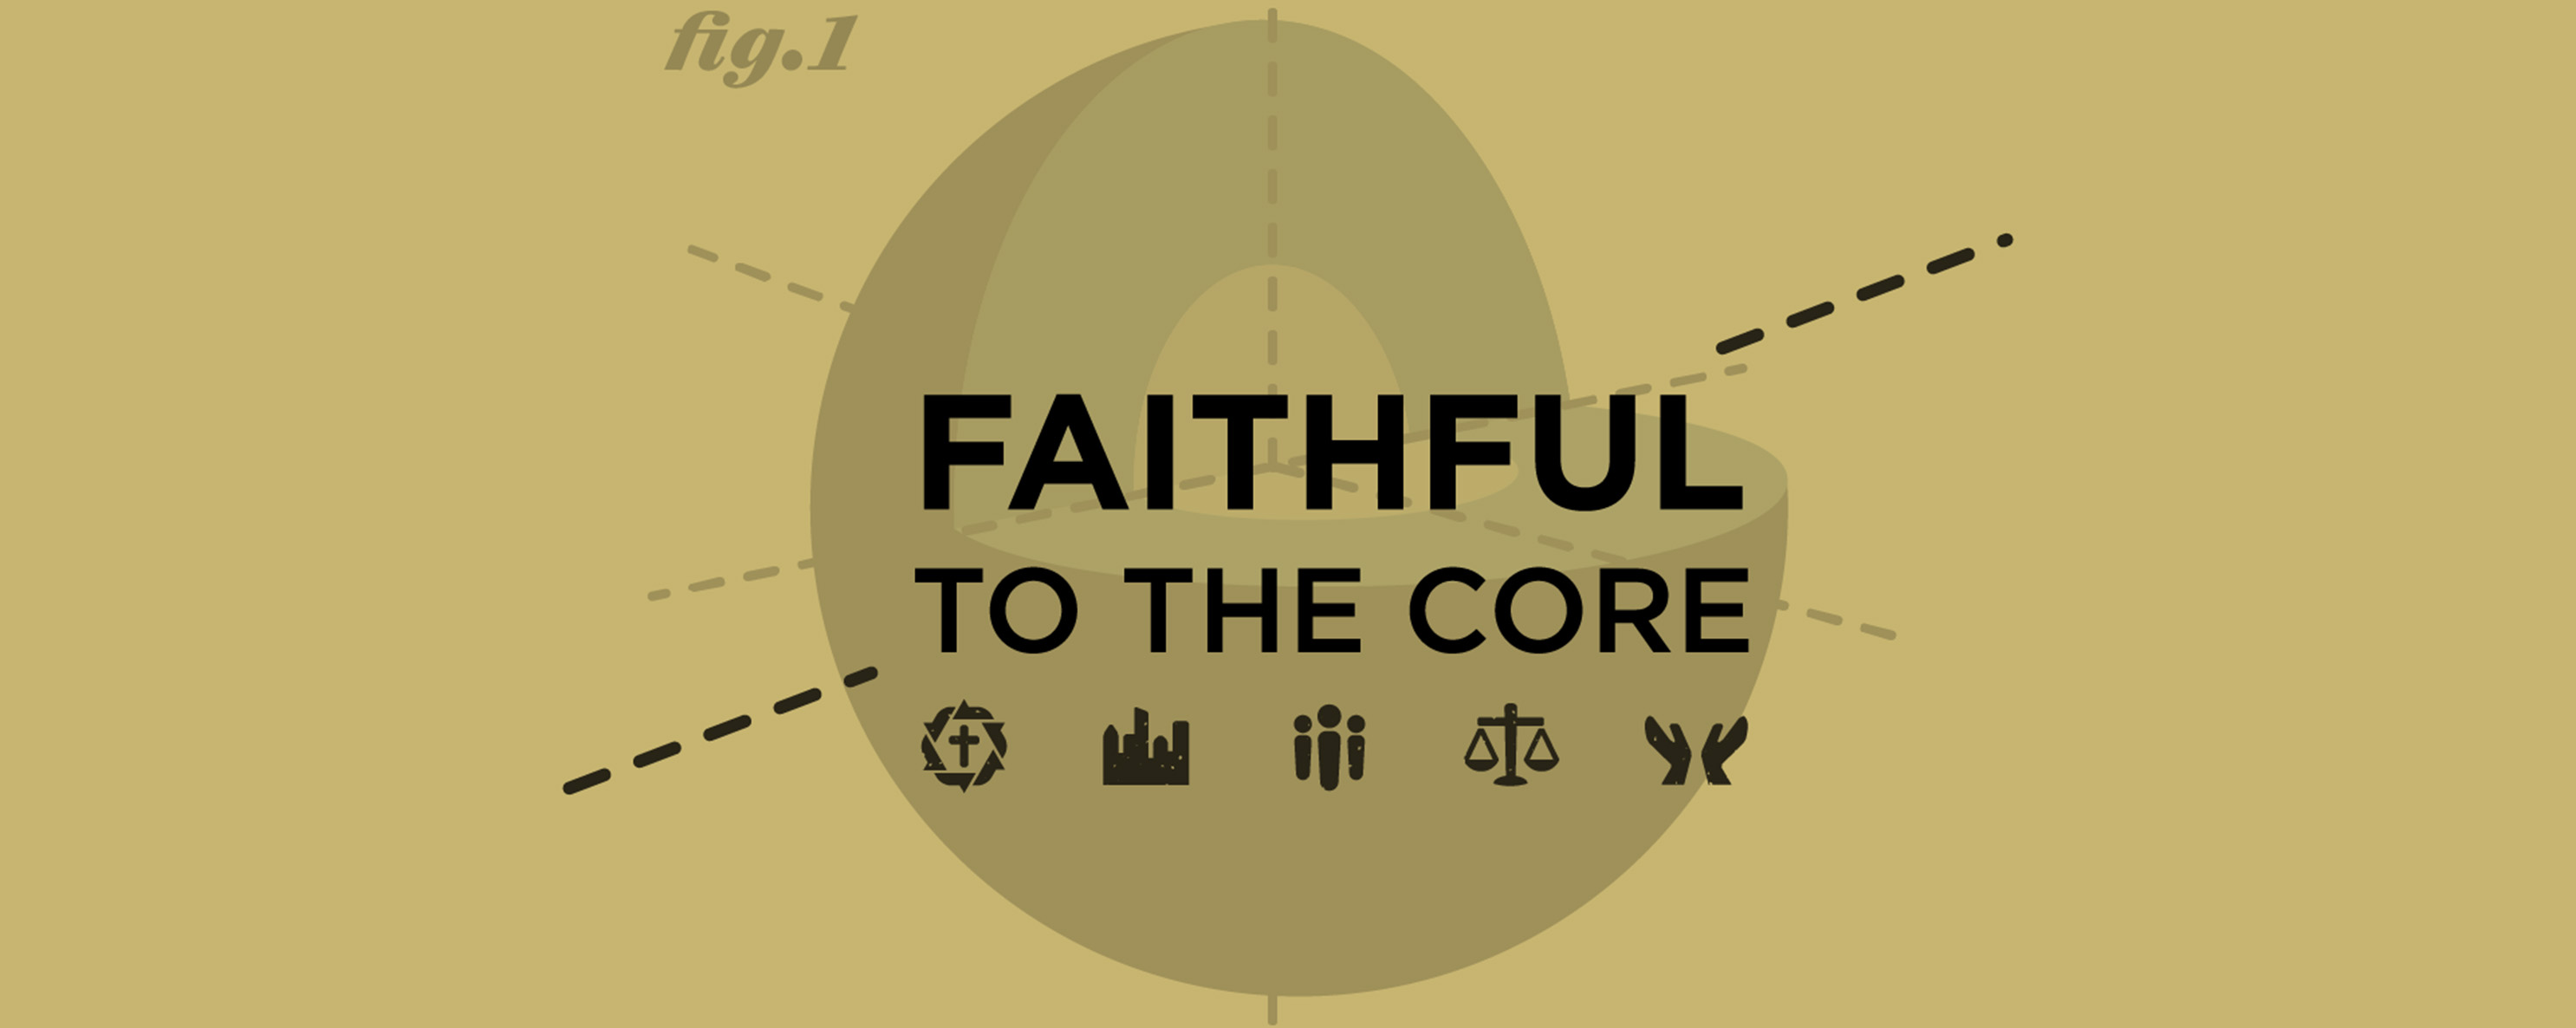 Faithful to the Core - 2019 banner